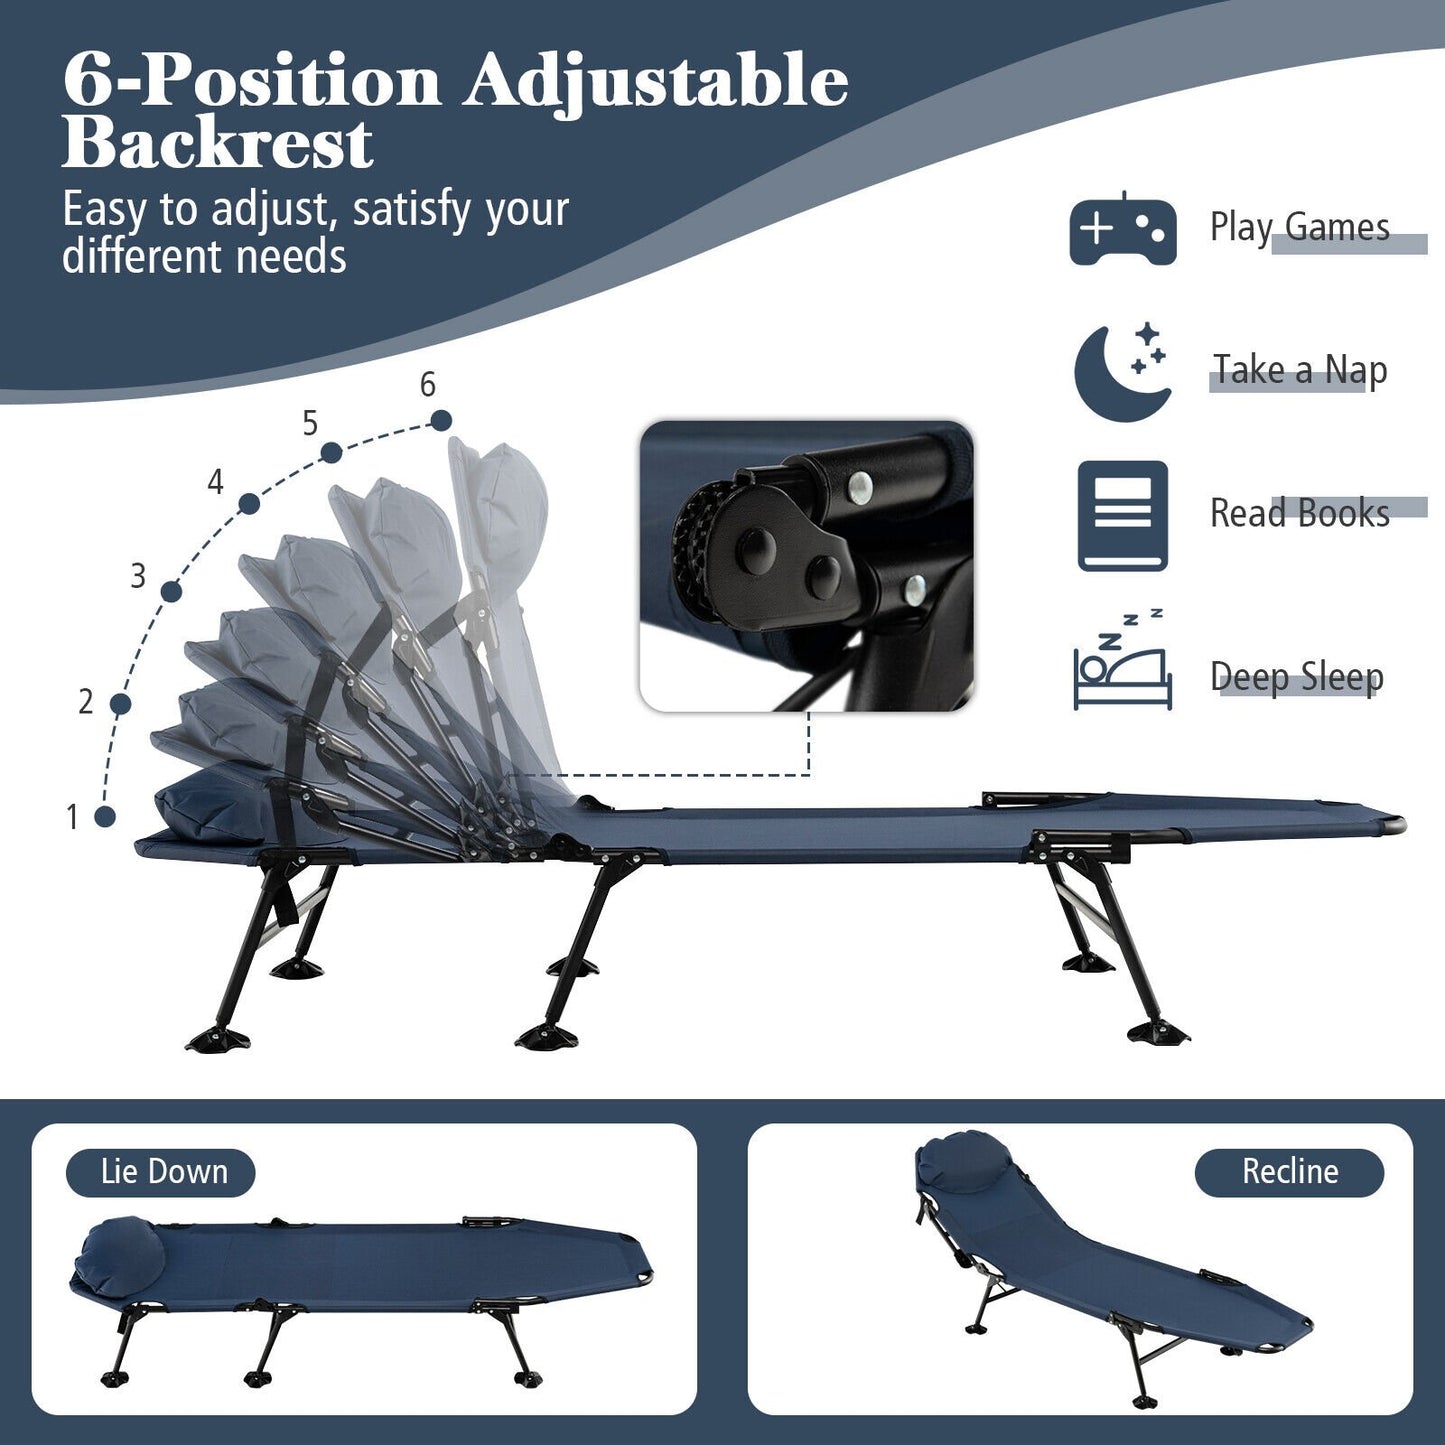 Folding Camping Cot with Detachable Mattress and Adjustable Backrest, Navy